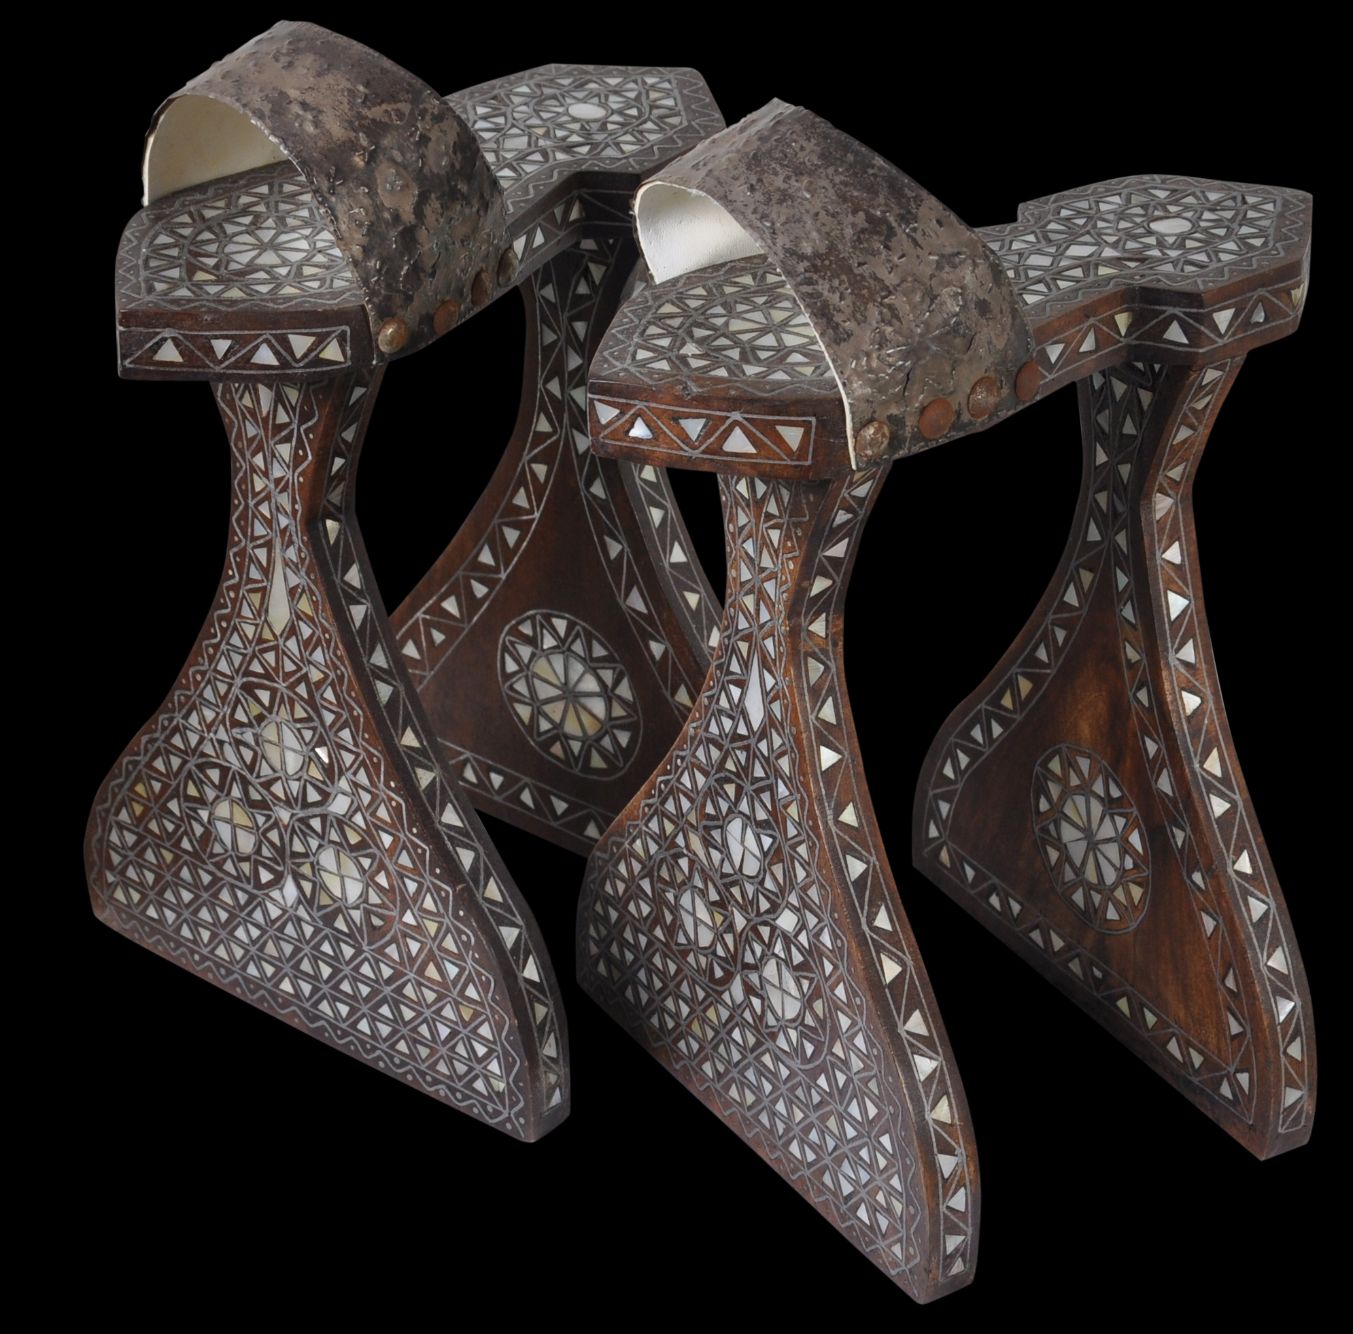 Unusually Tall Ottoman Woman&#39;s Mother-of-Pearl Inlaid Wooden Stilted Clogs  (Qabqab) •